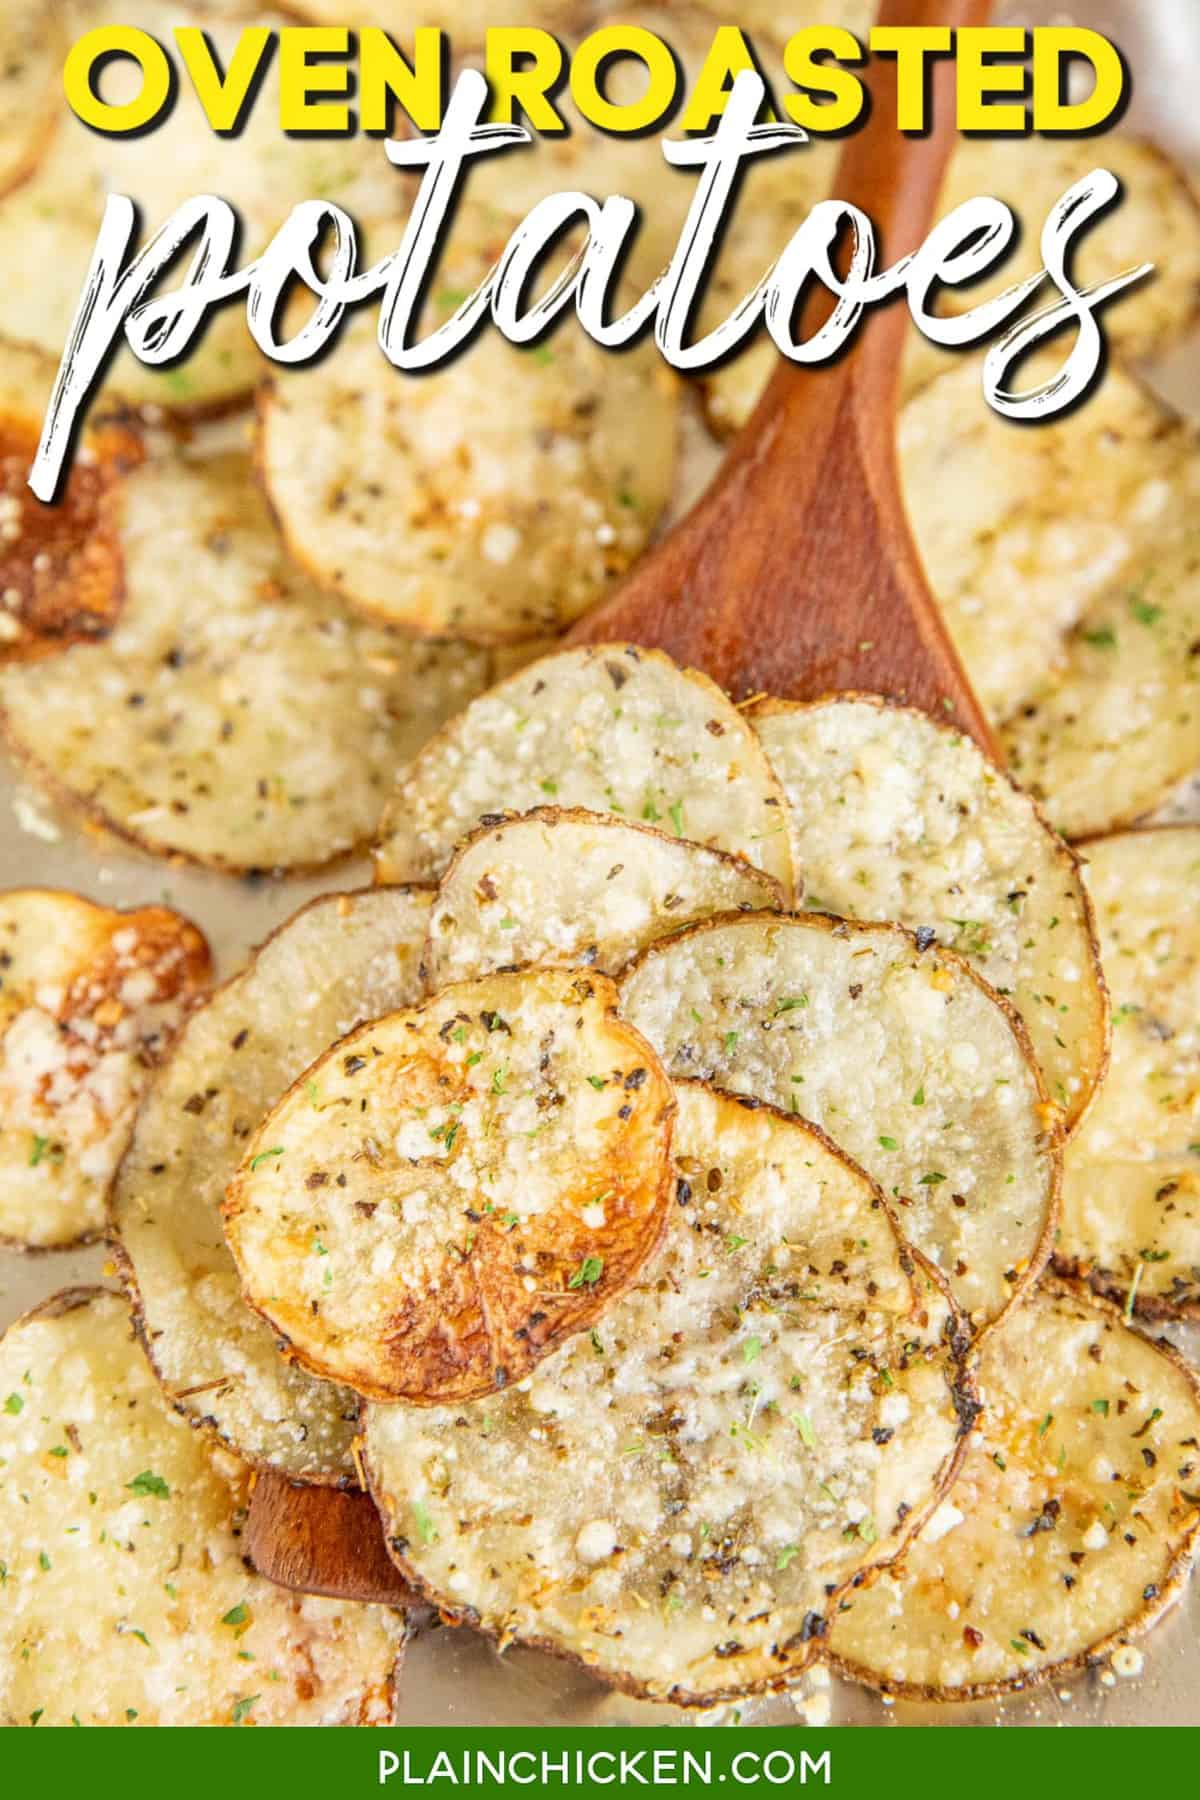 Spicy Roasted Potatoes Recipe - easy seasoned potatoes in the oven!